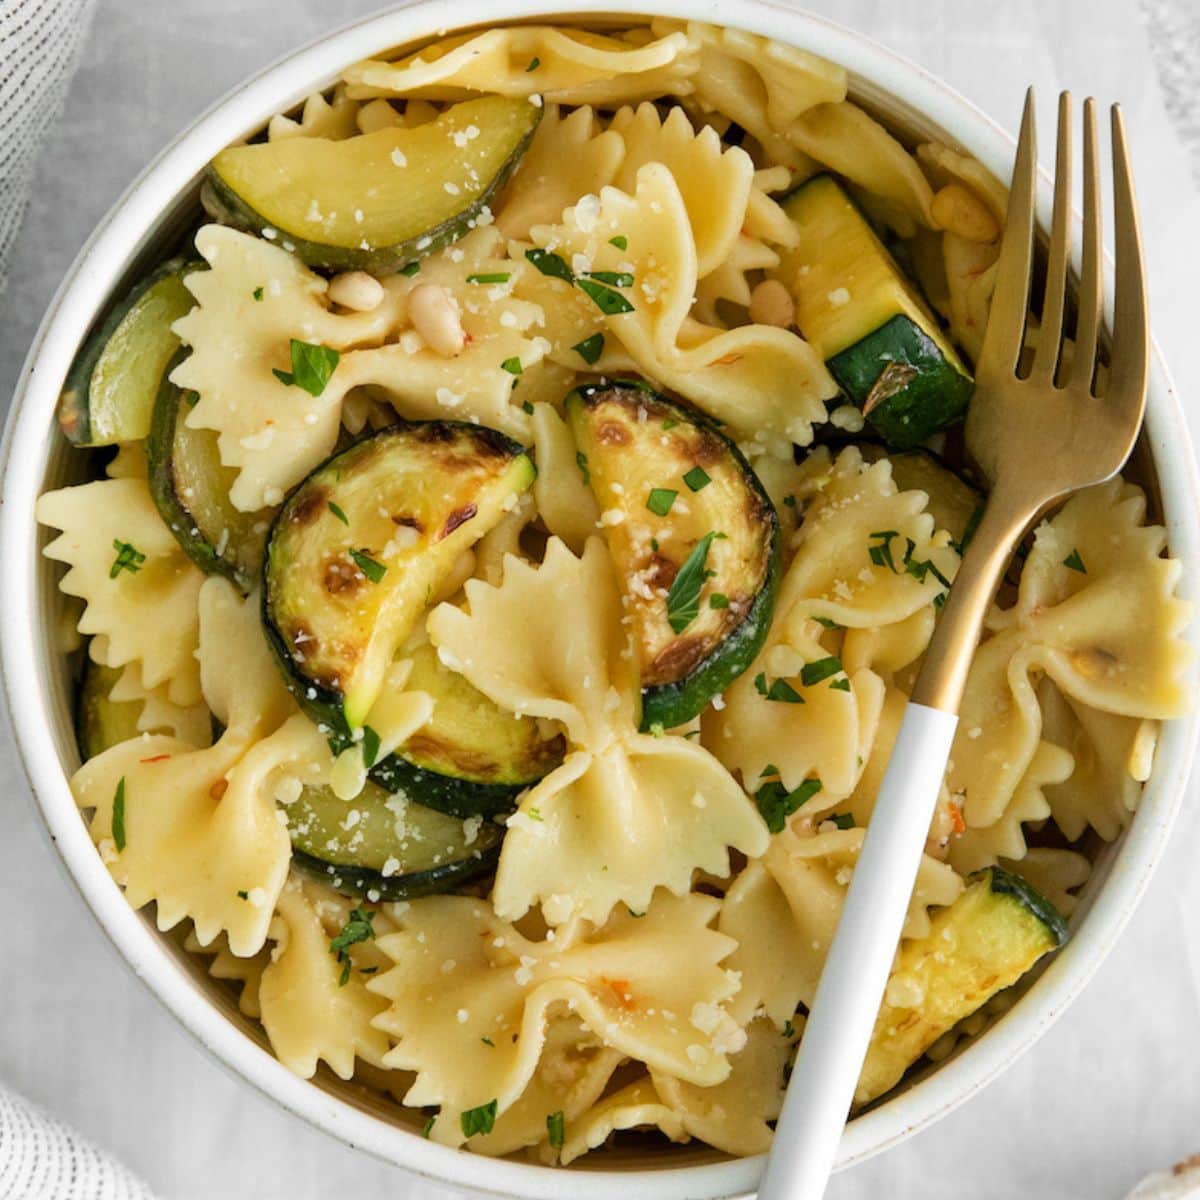 bowtie pasta in a white bowl with zucchini slices, pine nuts, herbs